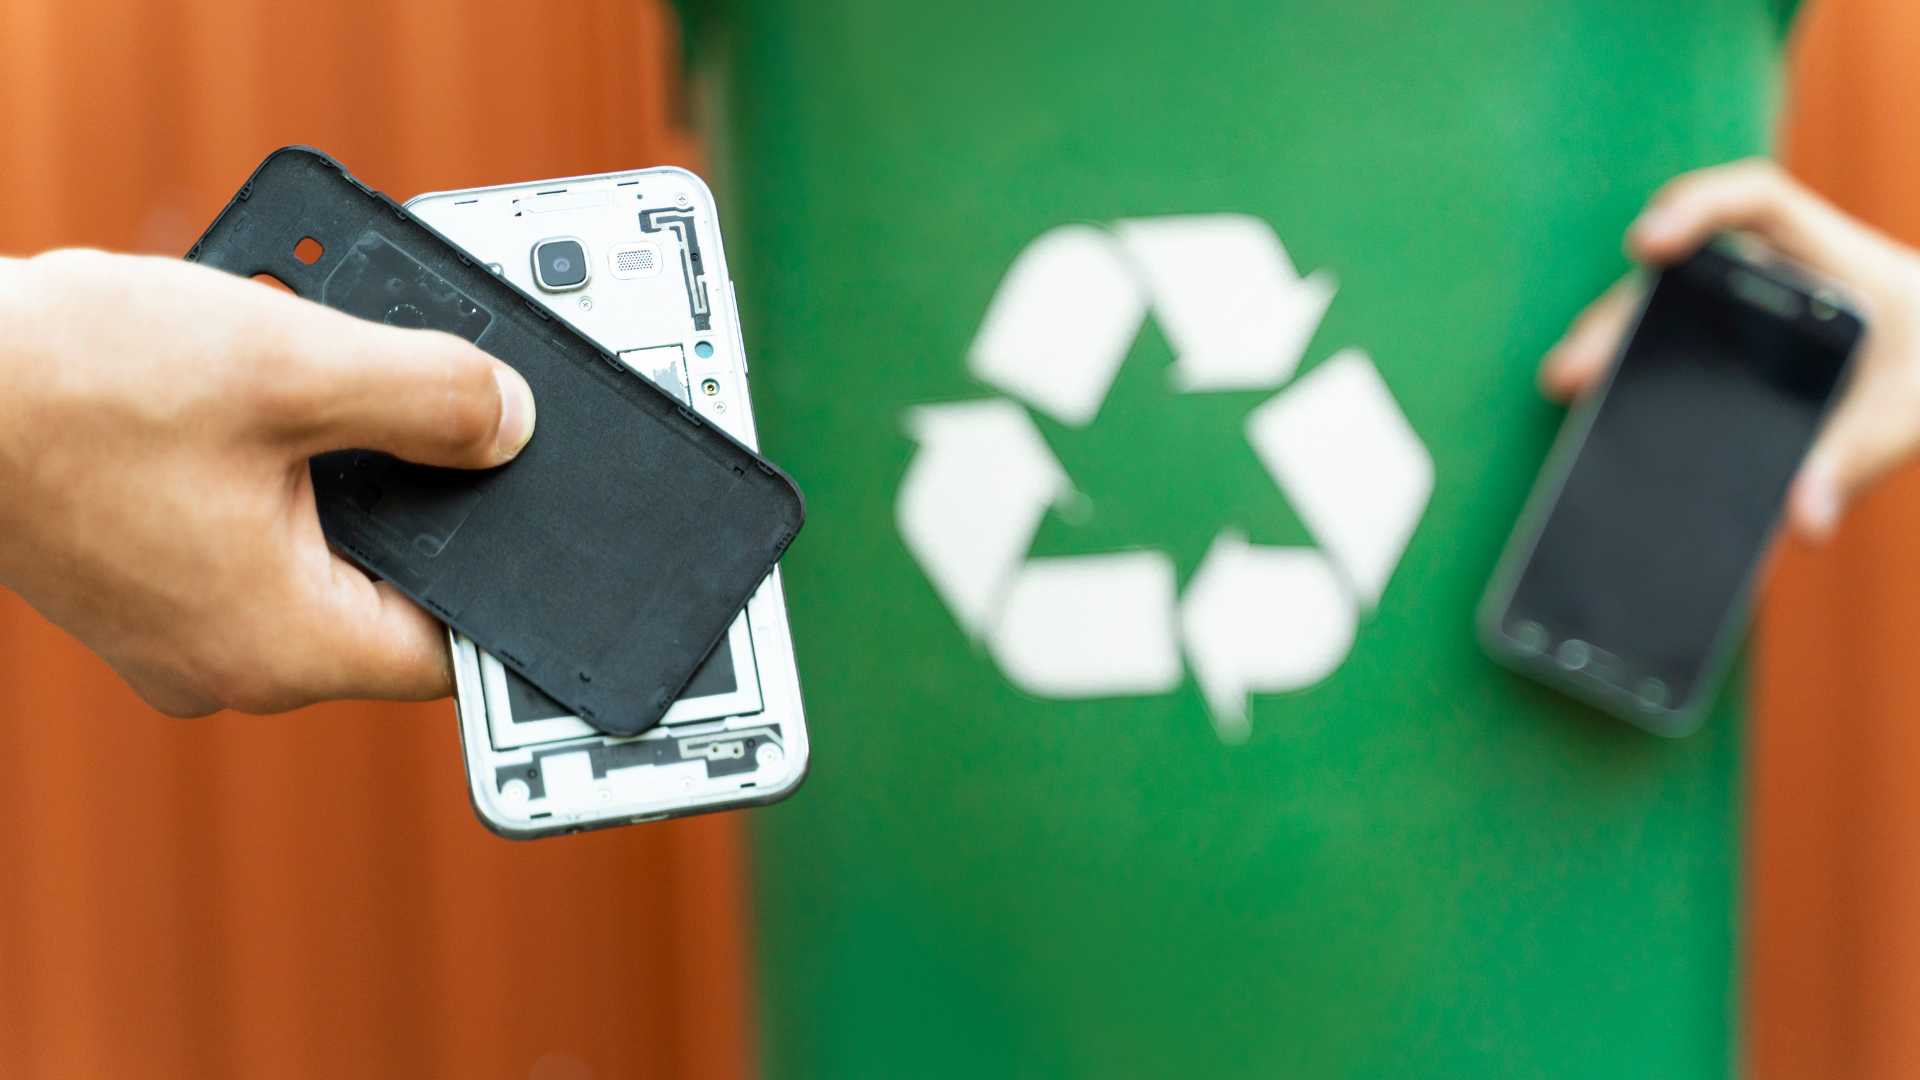 How to Recycle Smartphones in a Smart Way